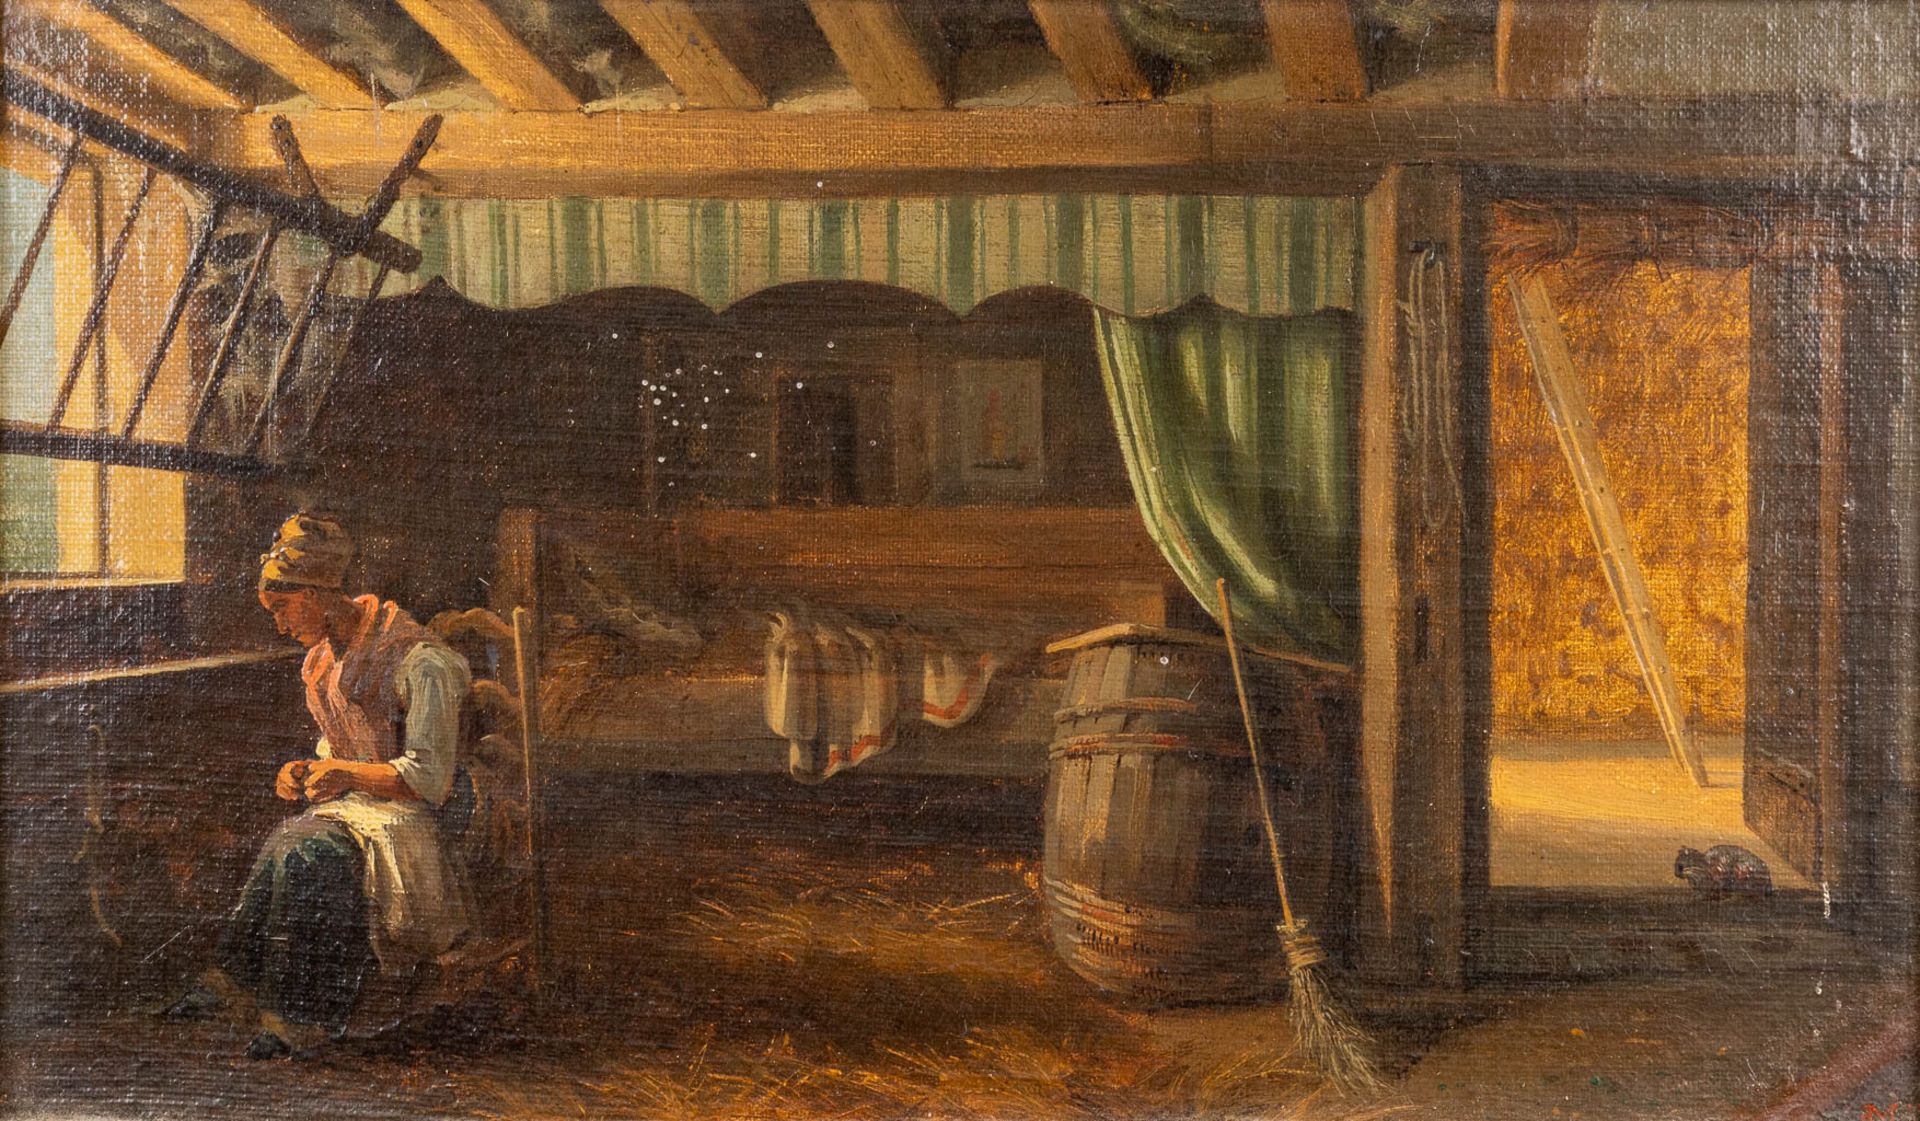 Monogram E.M. 'Interior of a stable', a painting, oil on panel. 19th C. (W:36 x H:21 cm)